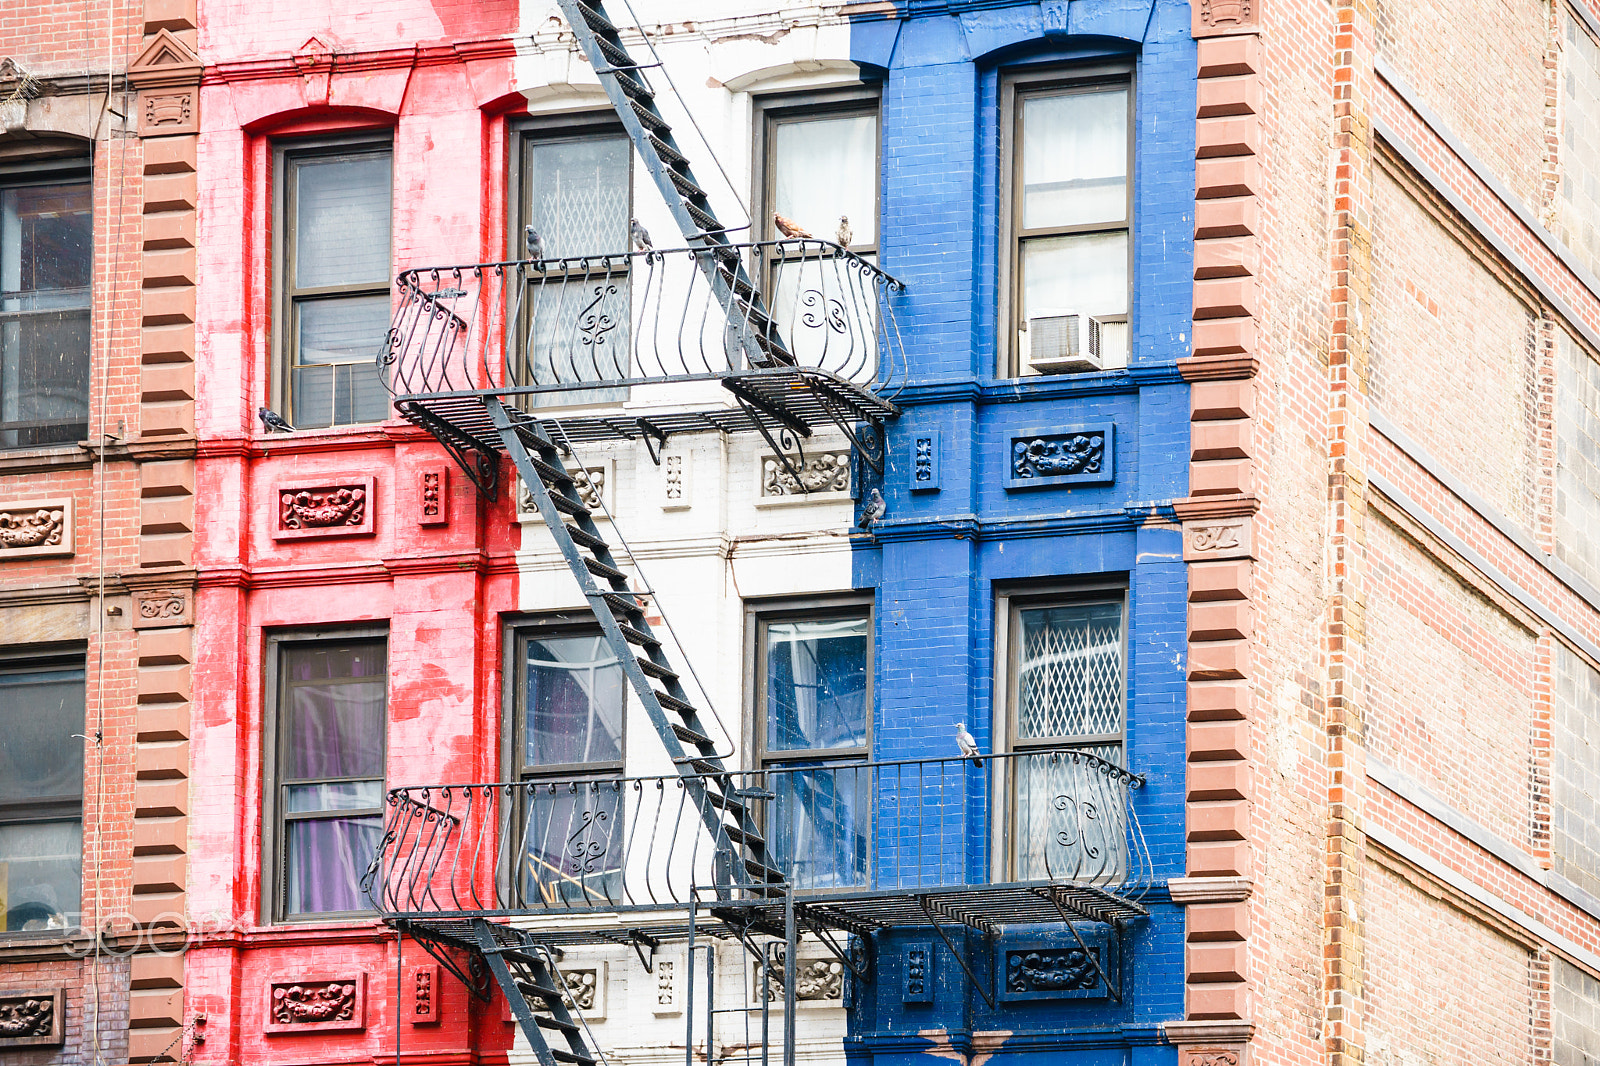 Sony a7 II + Tamron SP 70-300mm F4-5.6 Di USD sample photo. Aged colorful building with balconies photography